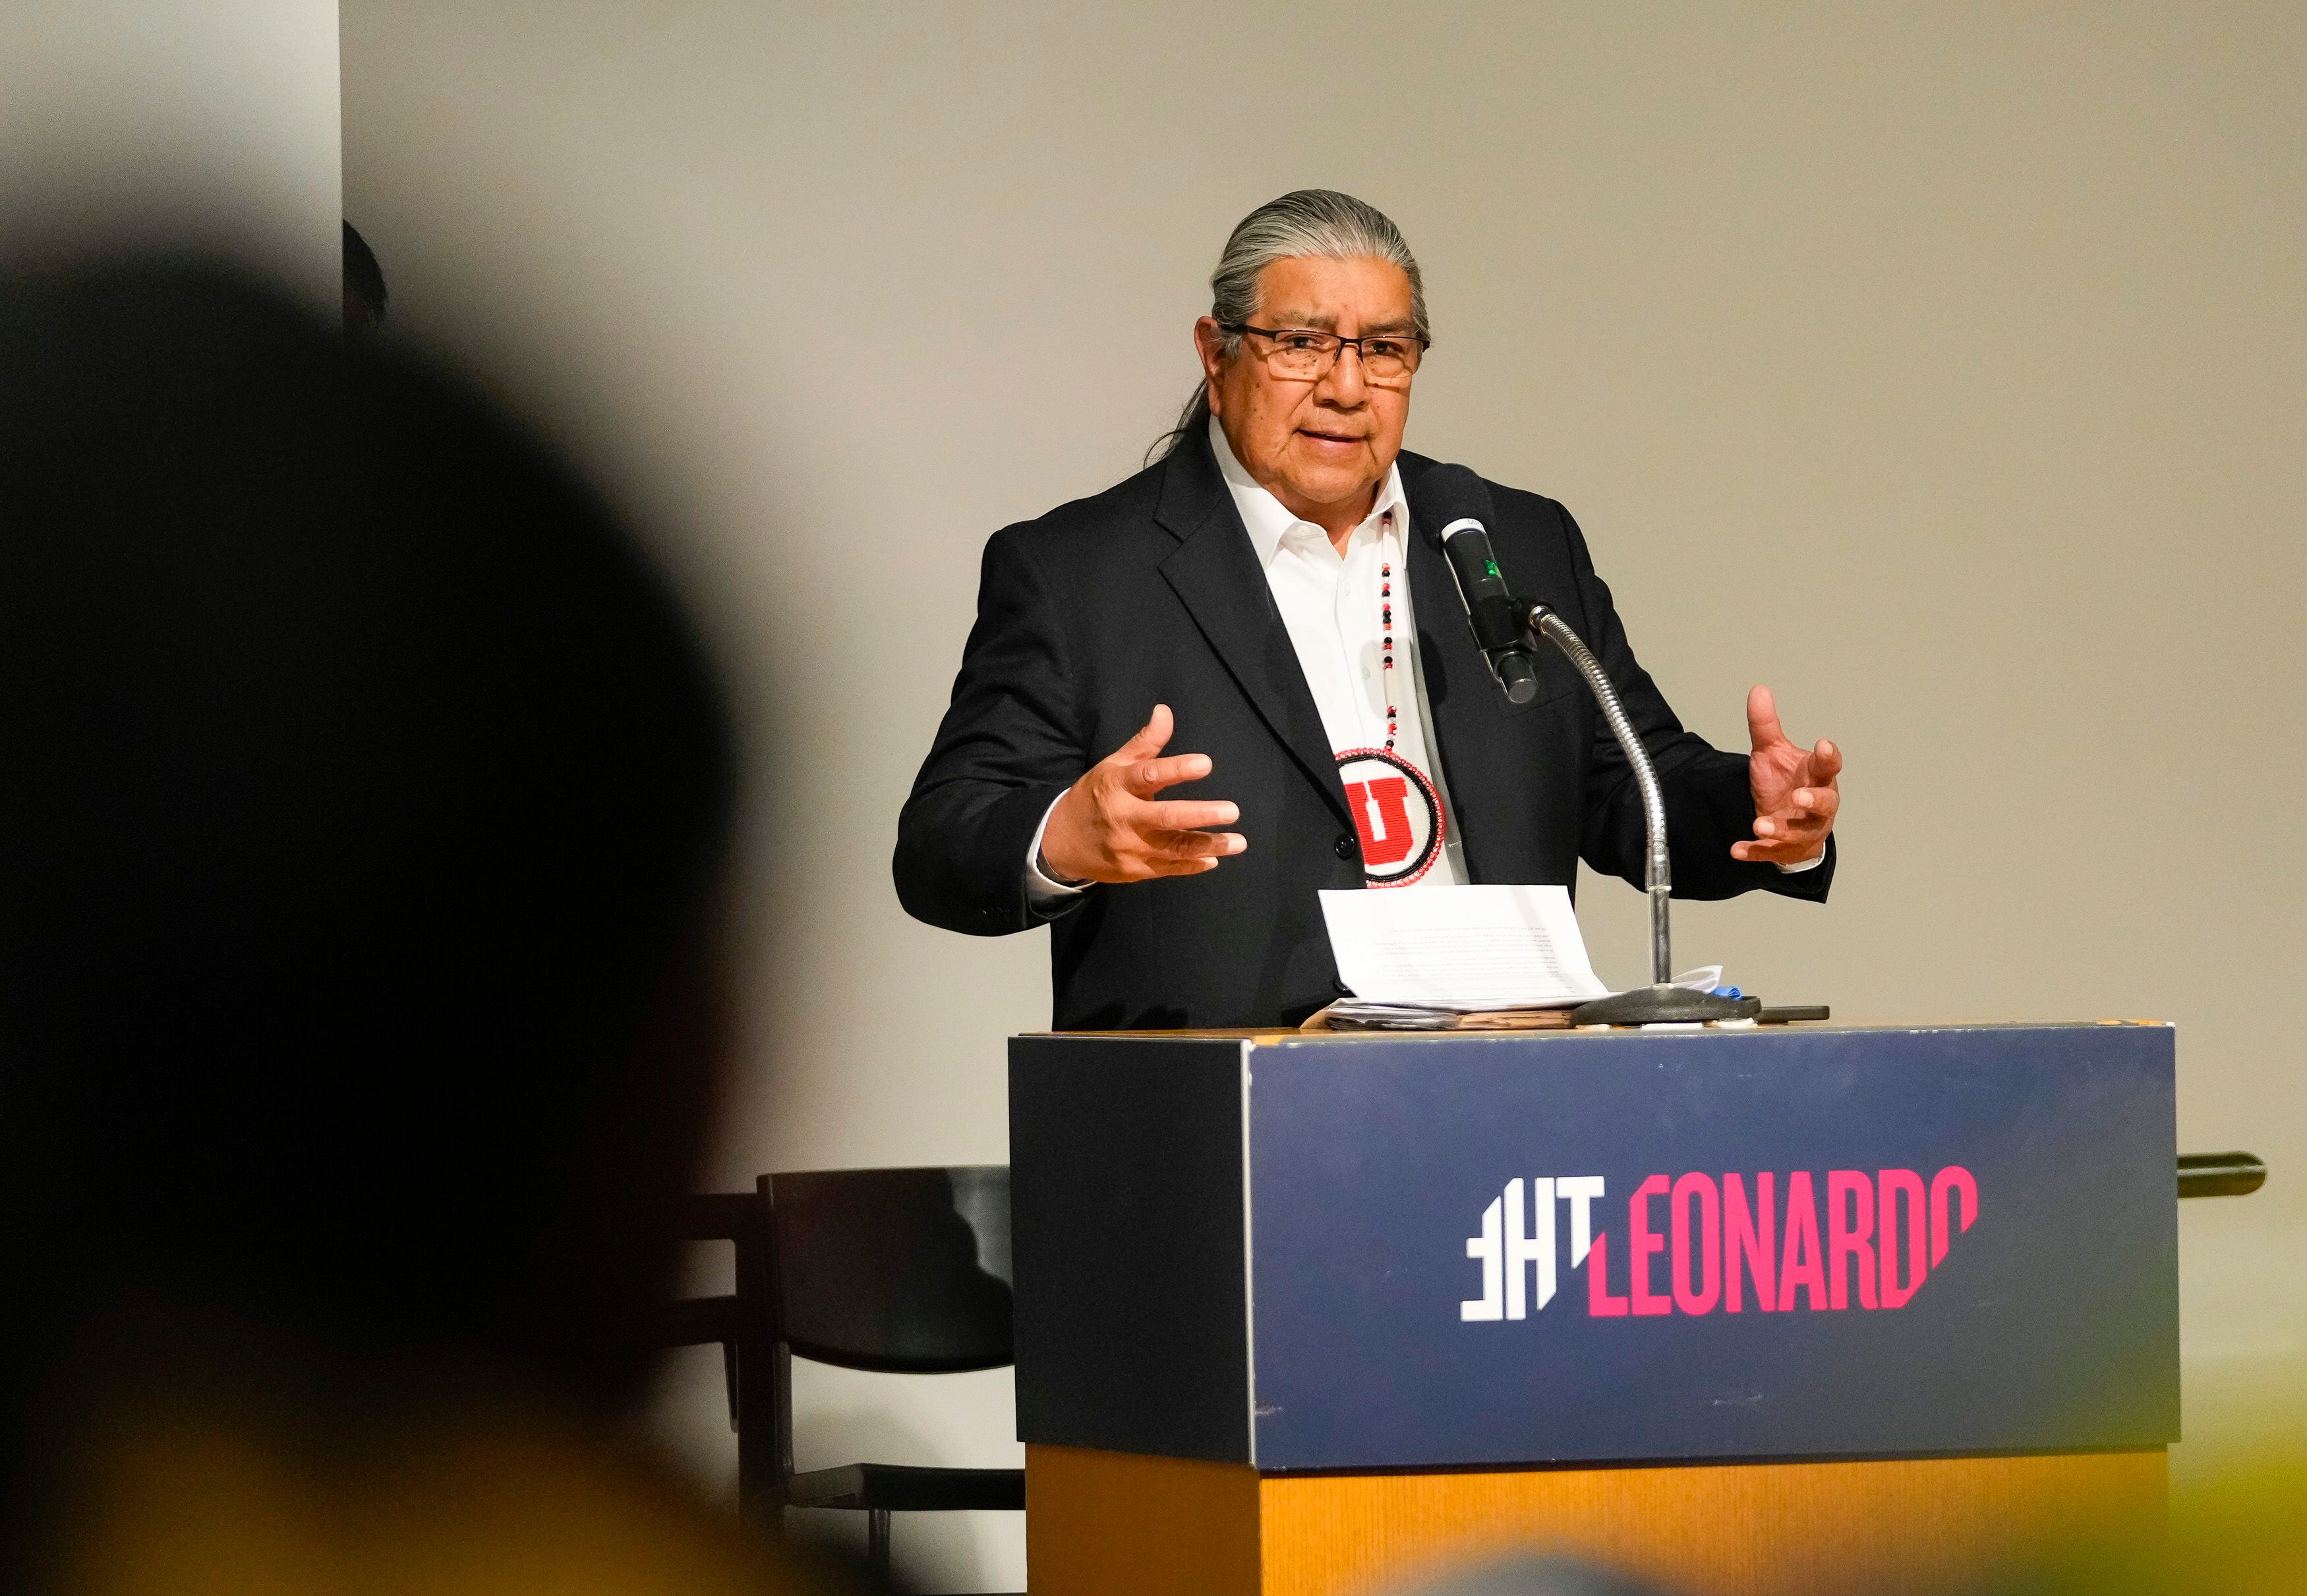 (Bethany Baker | The Salt Lake Tribune) Forrest Cuch, former director of the Utah Division of Indian Affairs, speaks during the opening event for the "100 Years of Silence" exhibition at The Leonardo in Salt Lake City on Saturday, March 23, 2024.